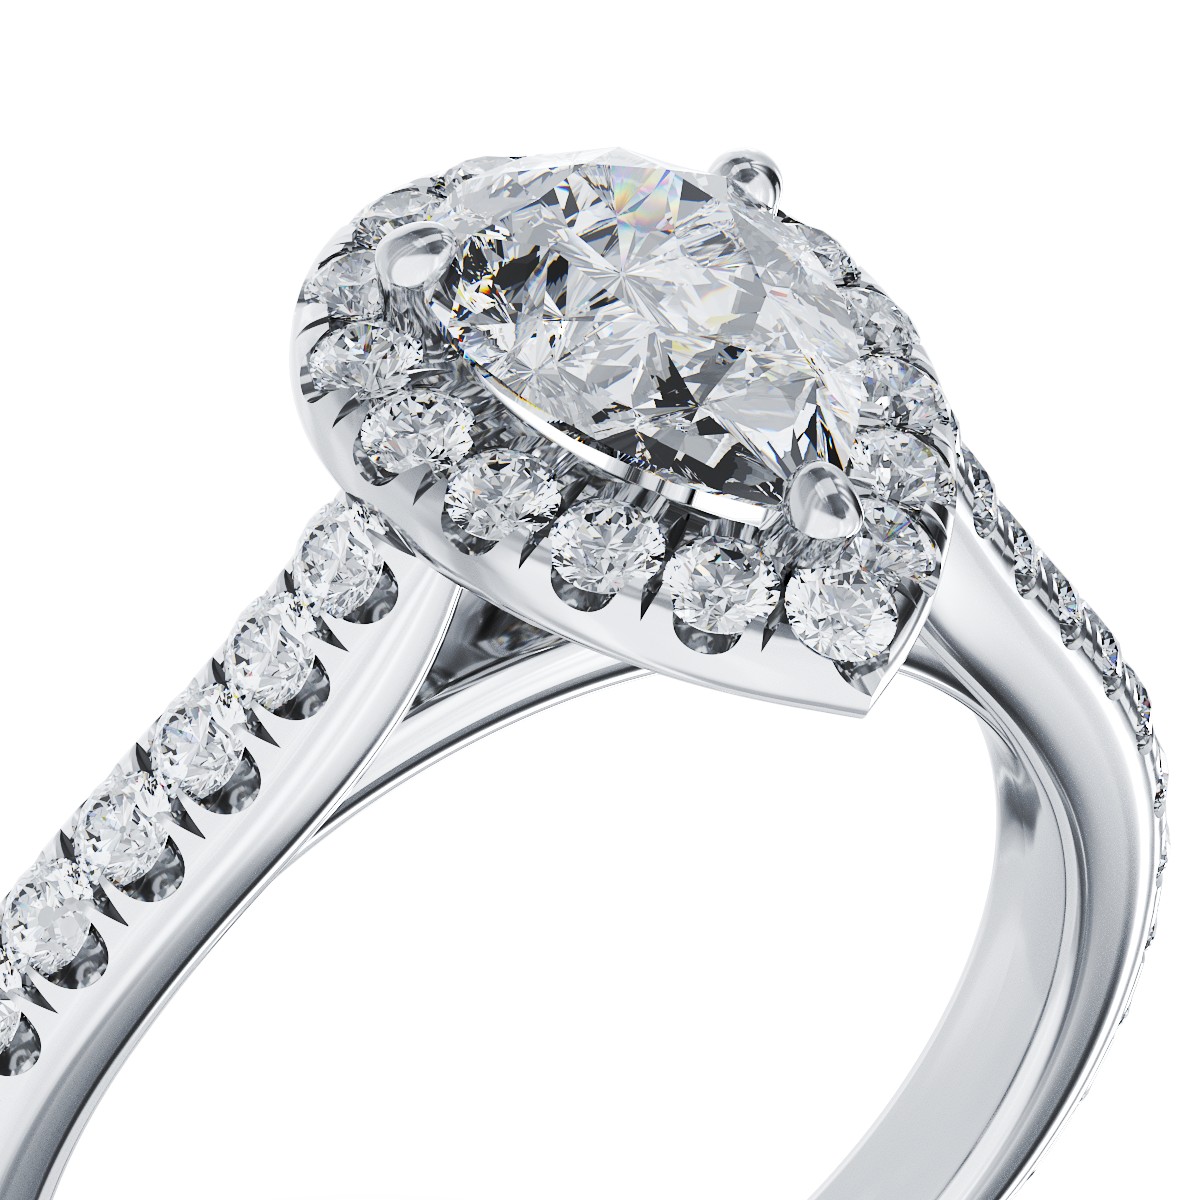 18K white gold engagement ring with 0.8ct diamond and 0.48ct diamond